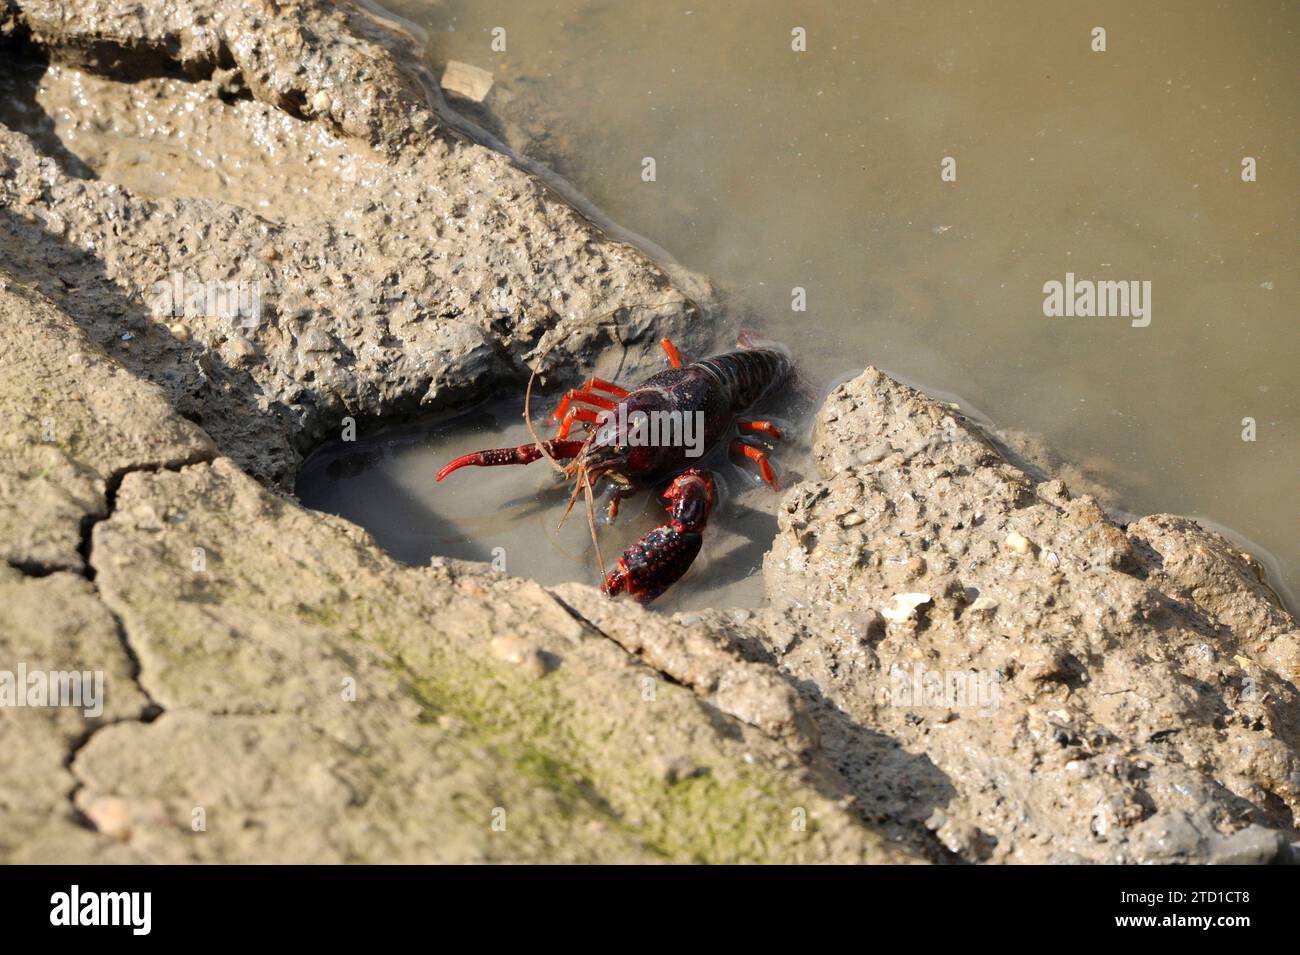 Red swamp crawfish or red swamp crayfish (Procambarus clarkii) is a freshwater crayfish native to northern Mexico and southern USA but introduced in o Stock Photo